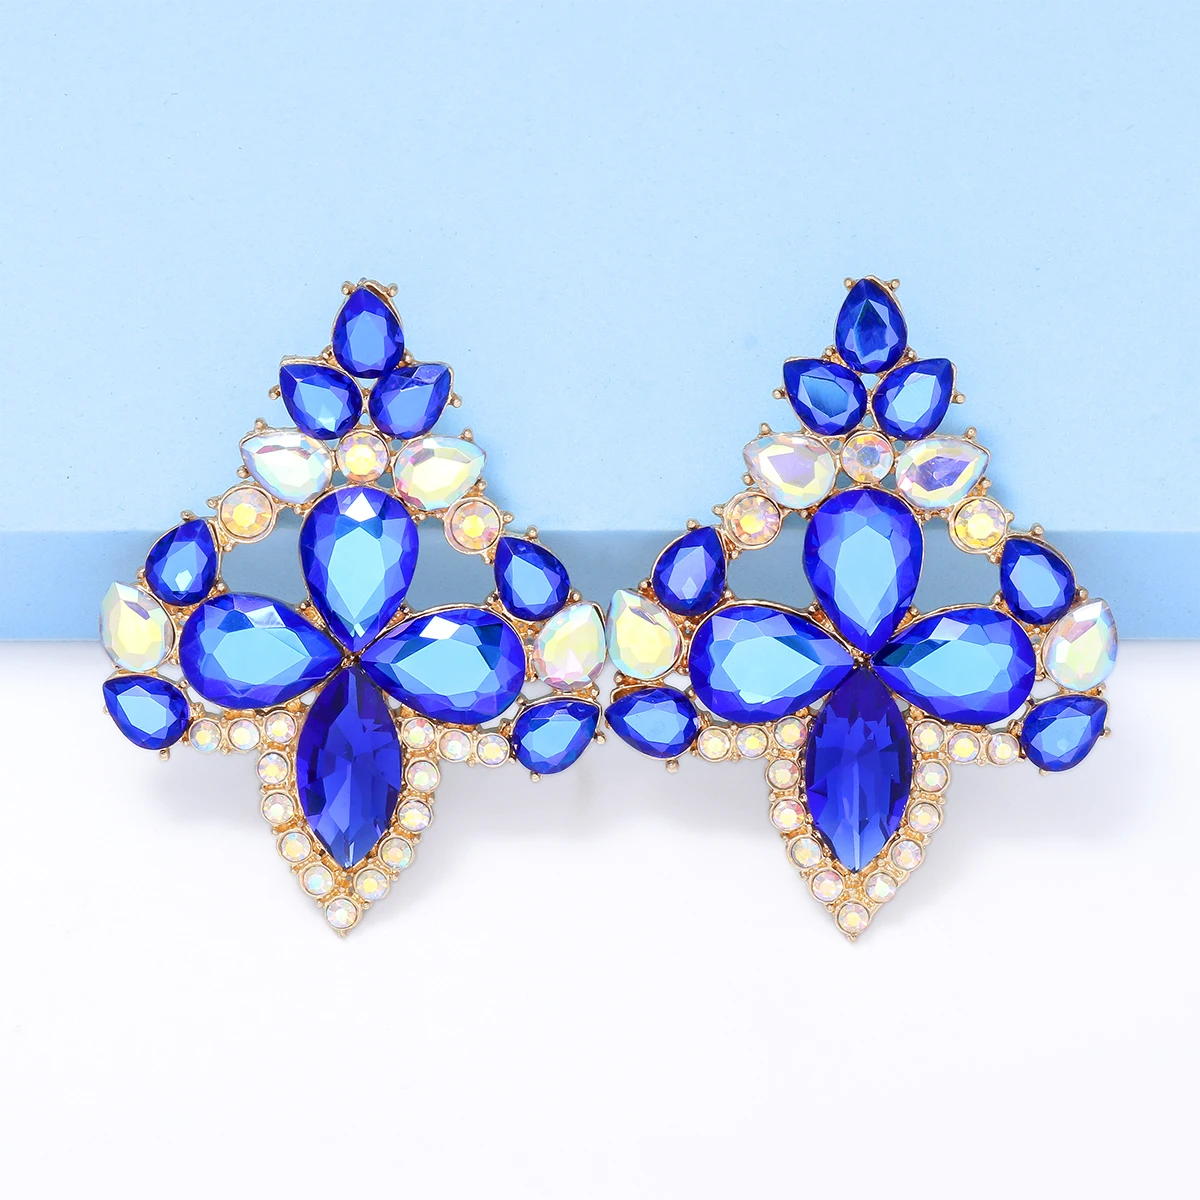 

JURAN Trendy New Luxury Blue Full Rhinestone Dangle Earrings High-quality Banquet Party Statement Jewelry for Women Brincos Gift